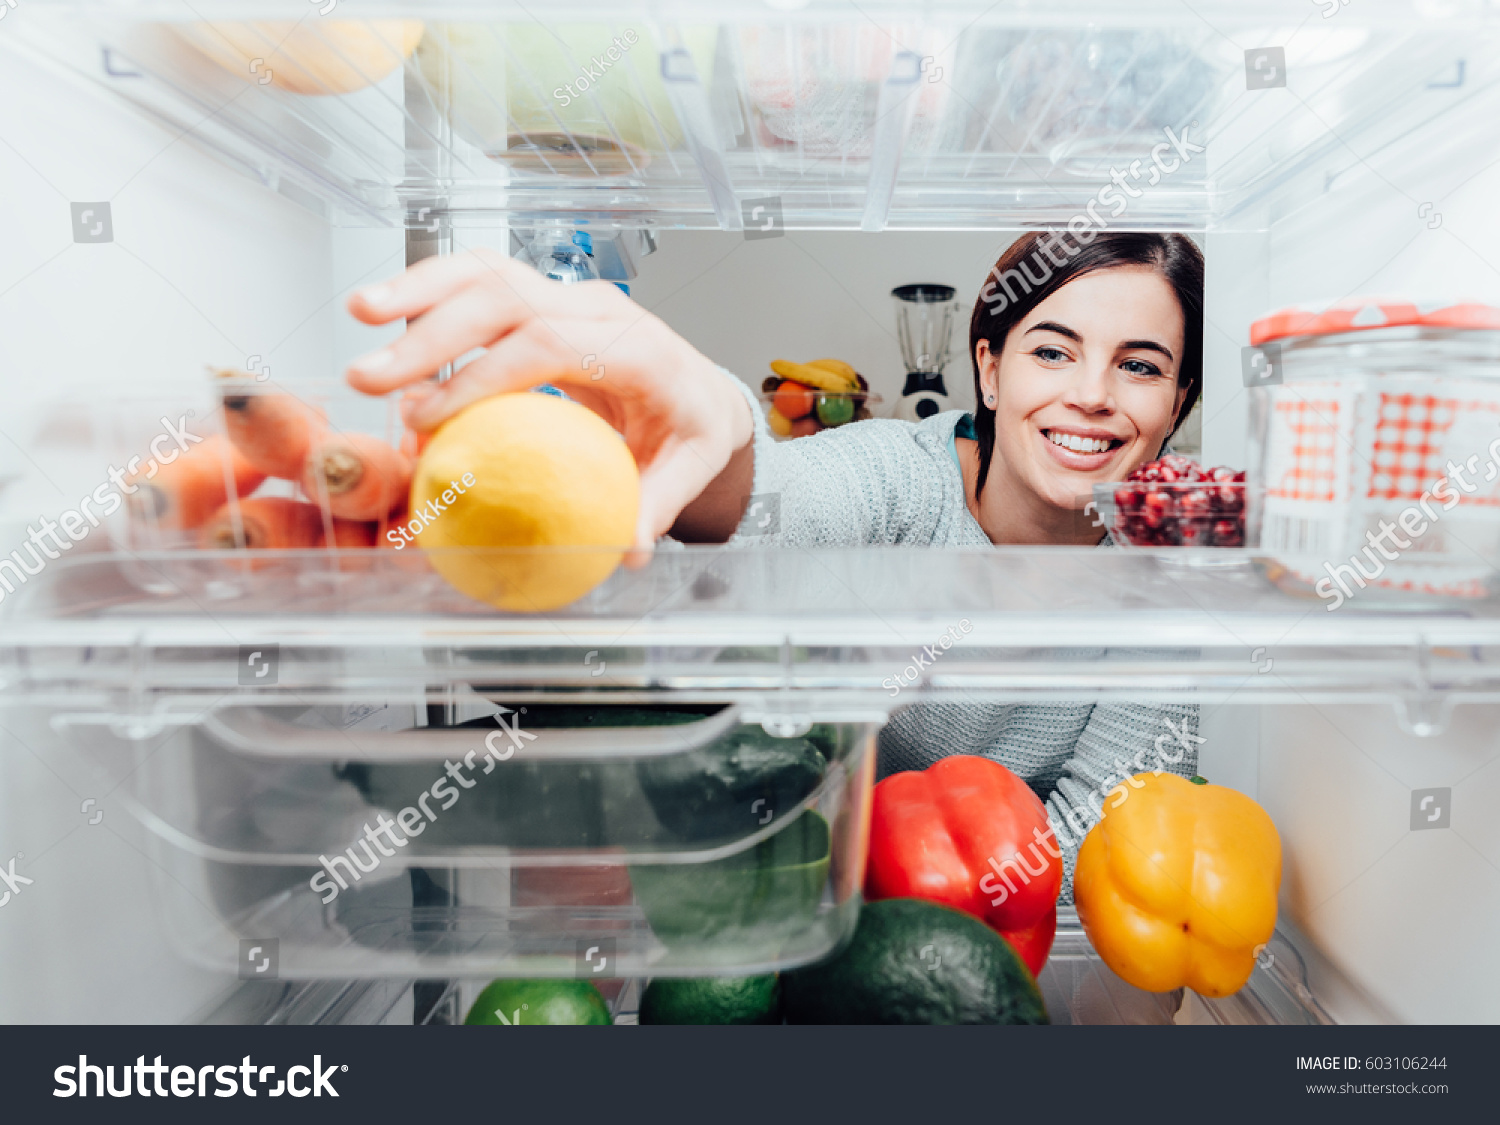 Smiling woman taking a fresh lemon out of the fridge, healthy food concept #603106244